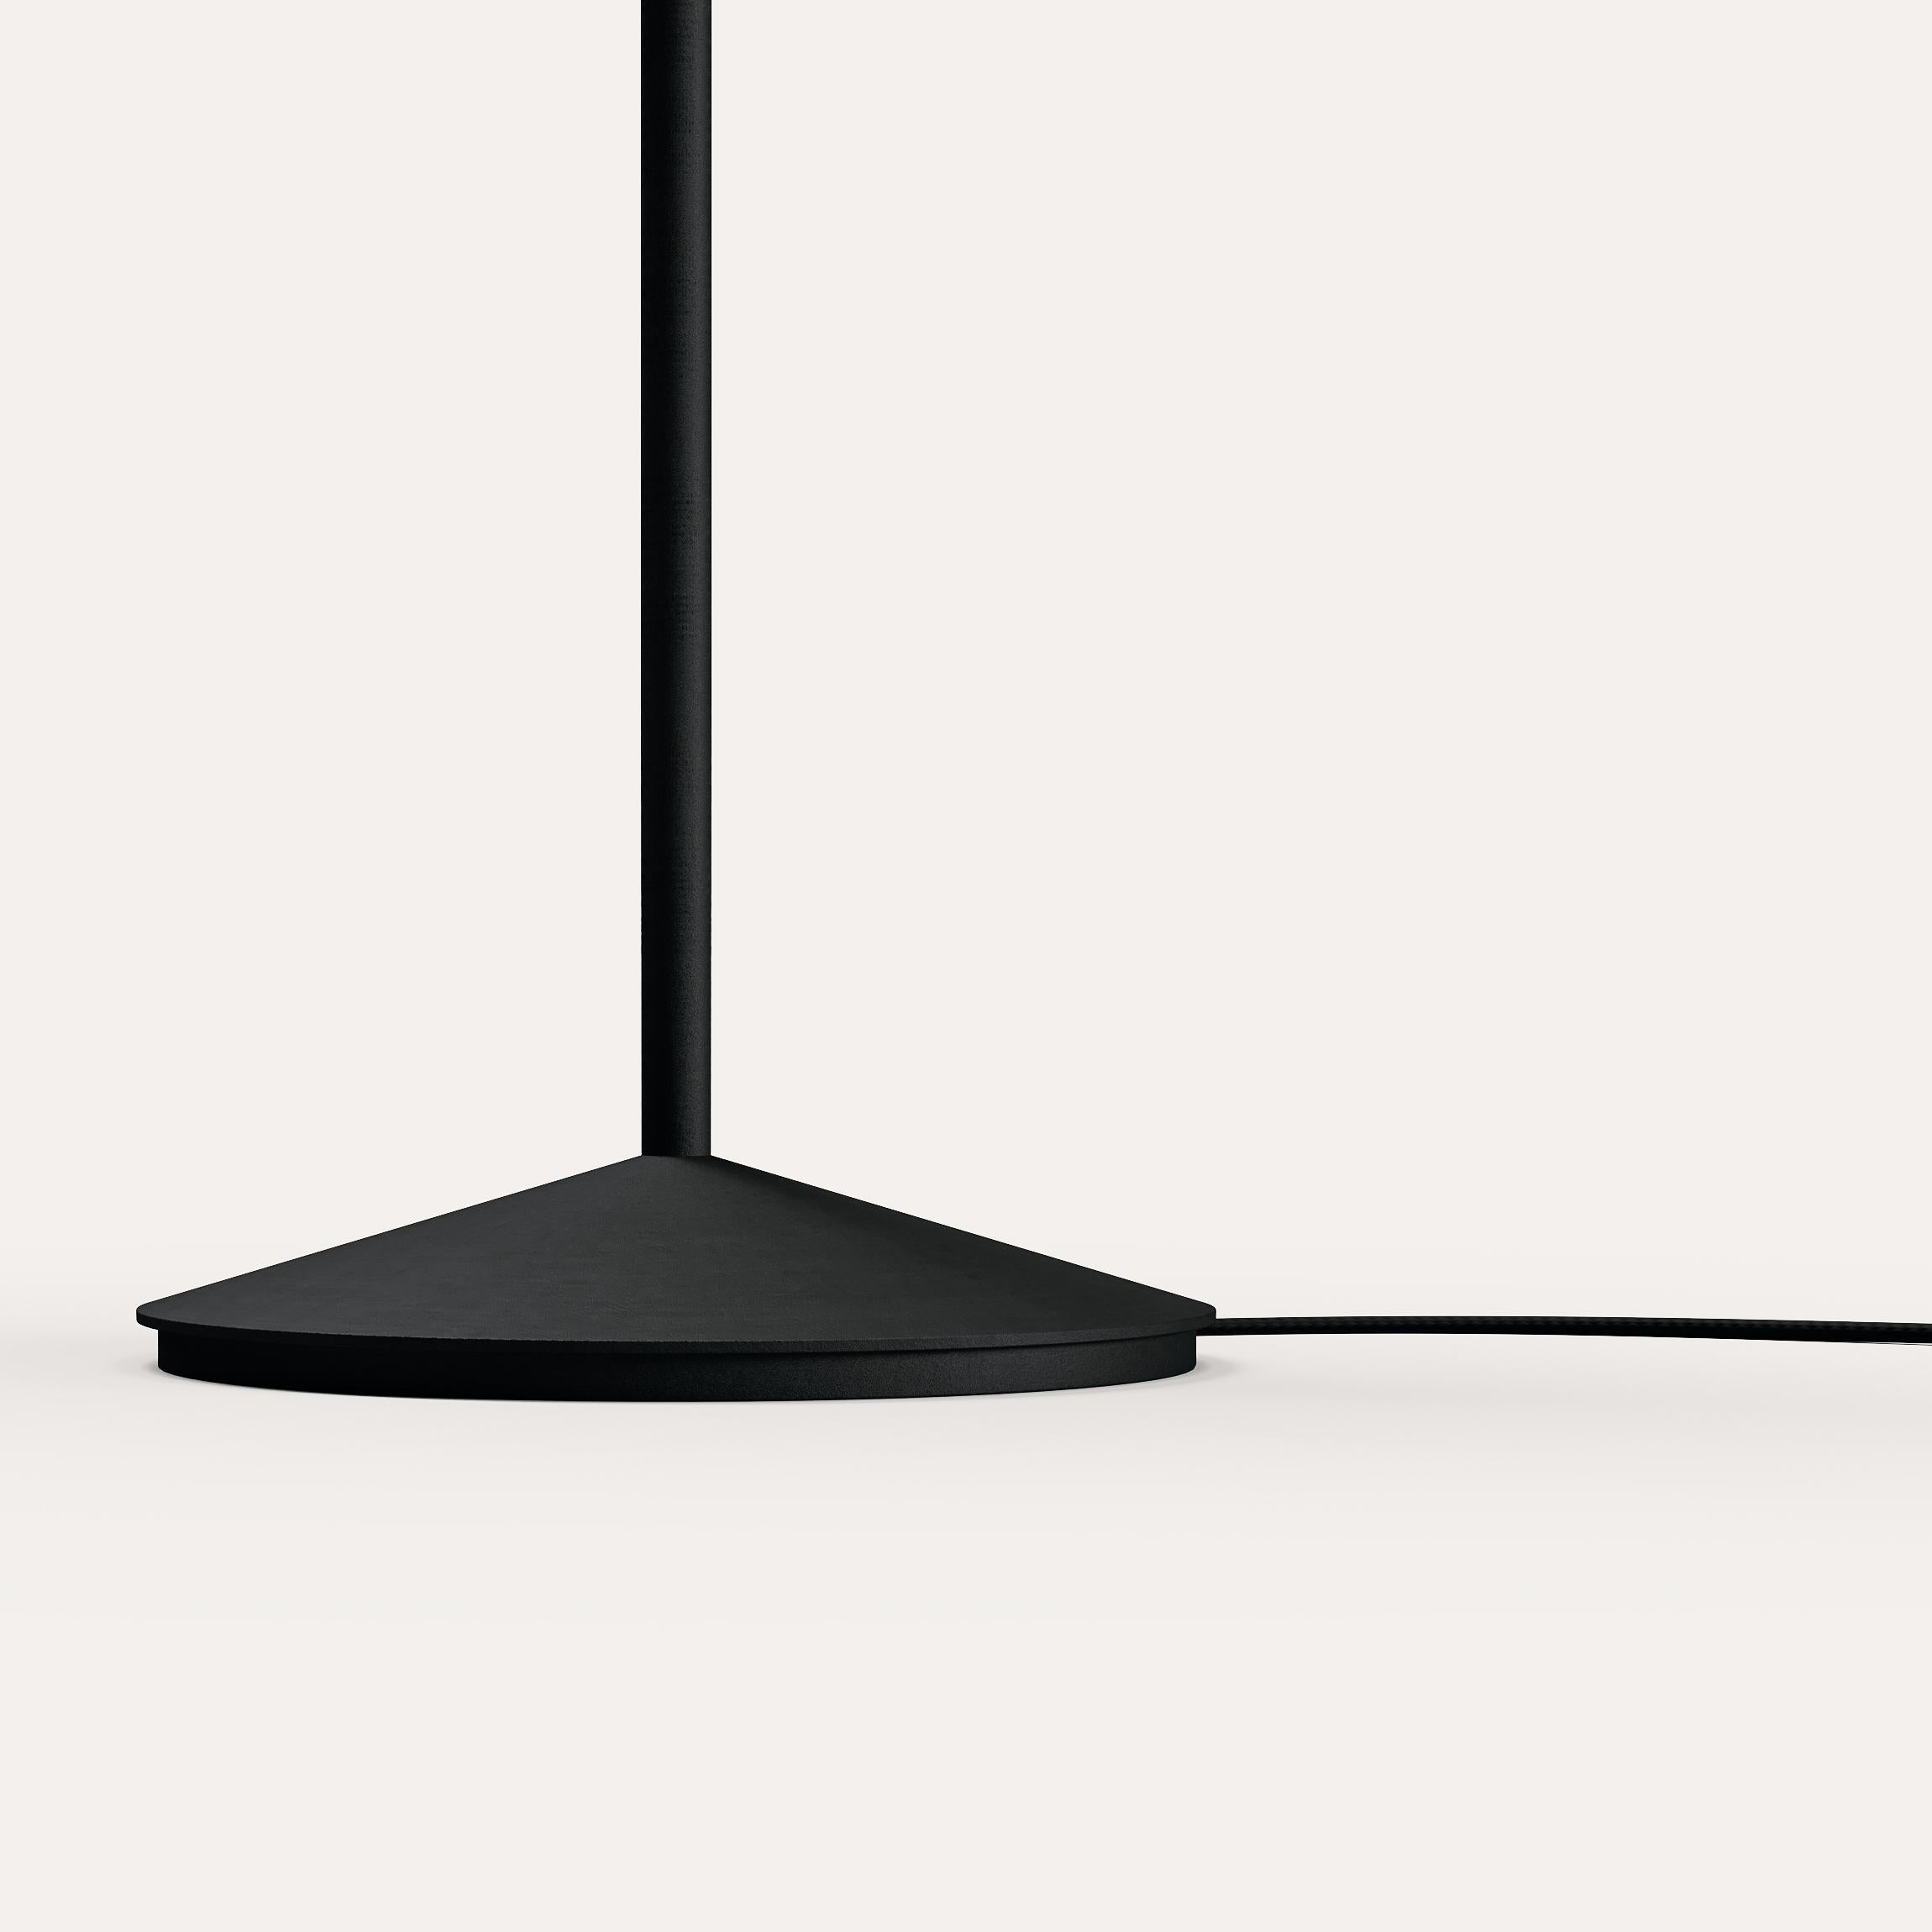 Powder-Coated Circus Floor Lamp Designed by Corinna Warm for Warm White/Bronze For Sale